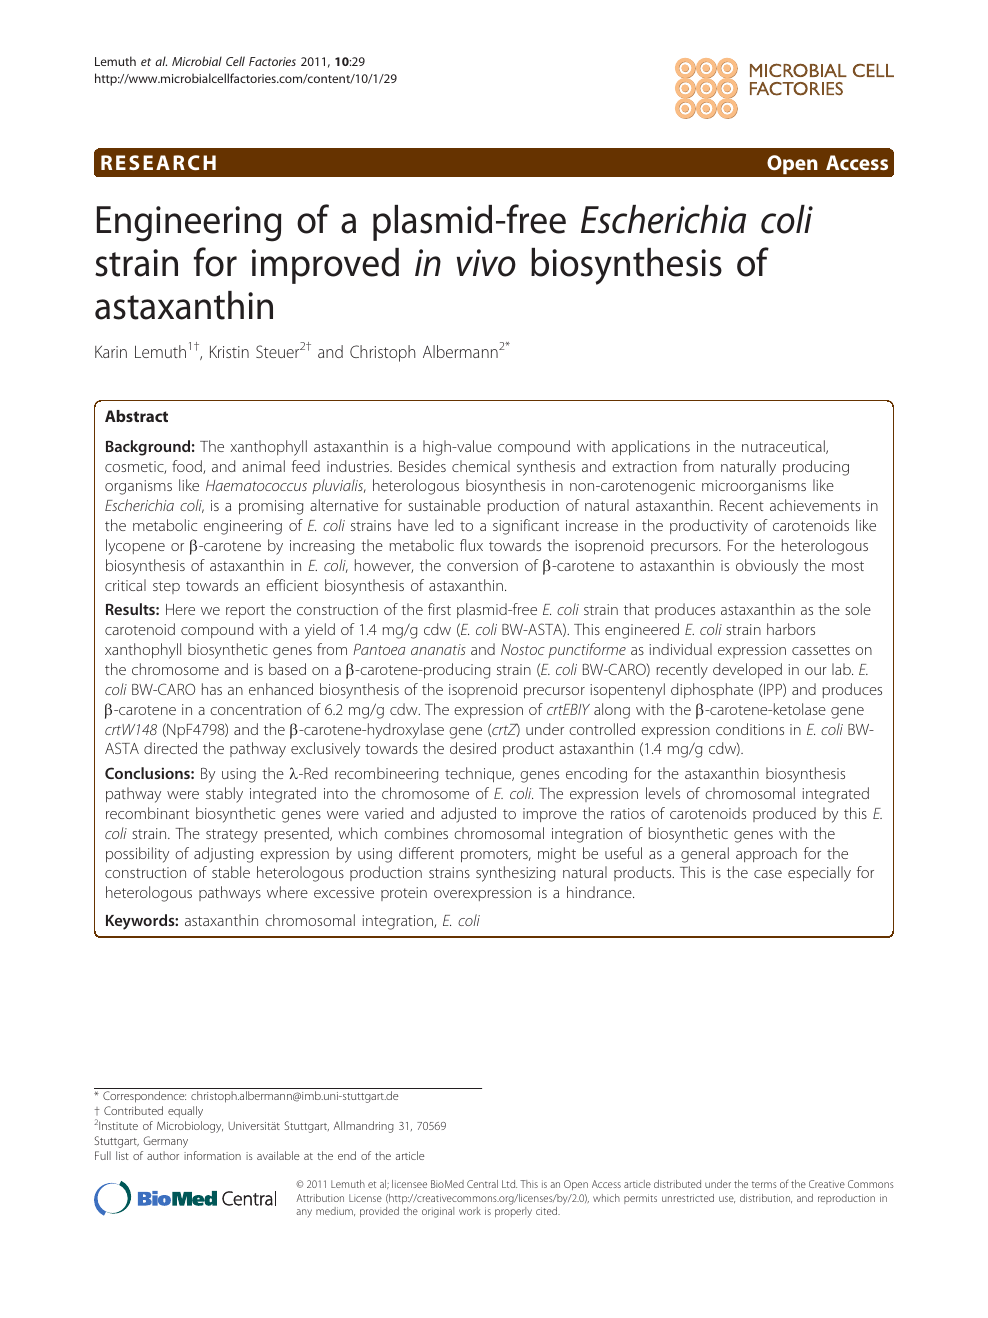 Engineering Of A Plasmid Free Escherichia Coli Strain For Improved In Vivo Biosynthesis Of Astaxanthin Topic Of Research Paper In Biological Sciences Download Scholarly Article Pdf And Read For Free On Cyberleninka